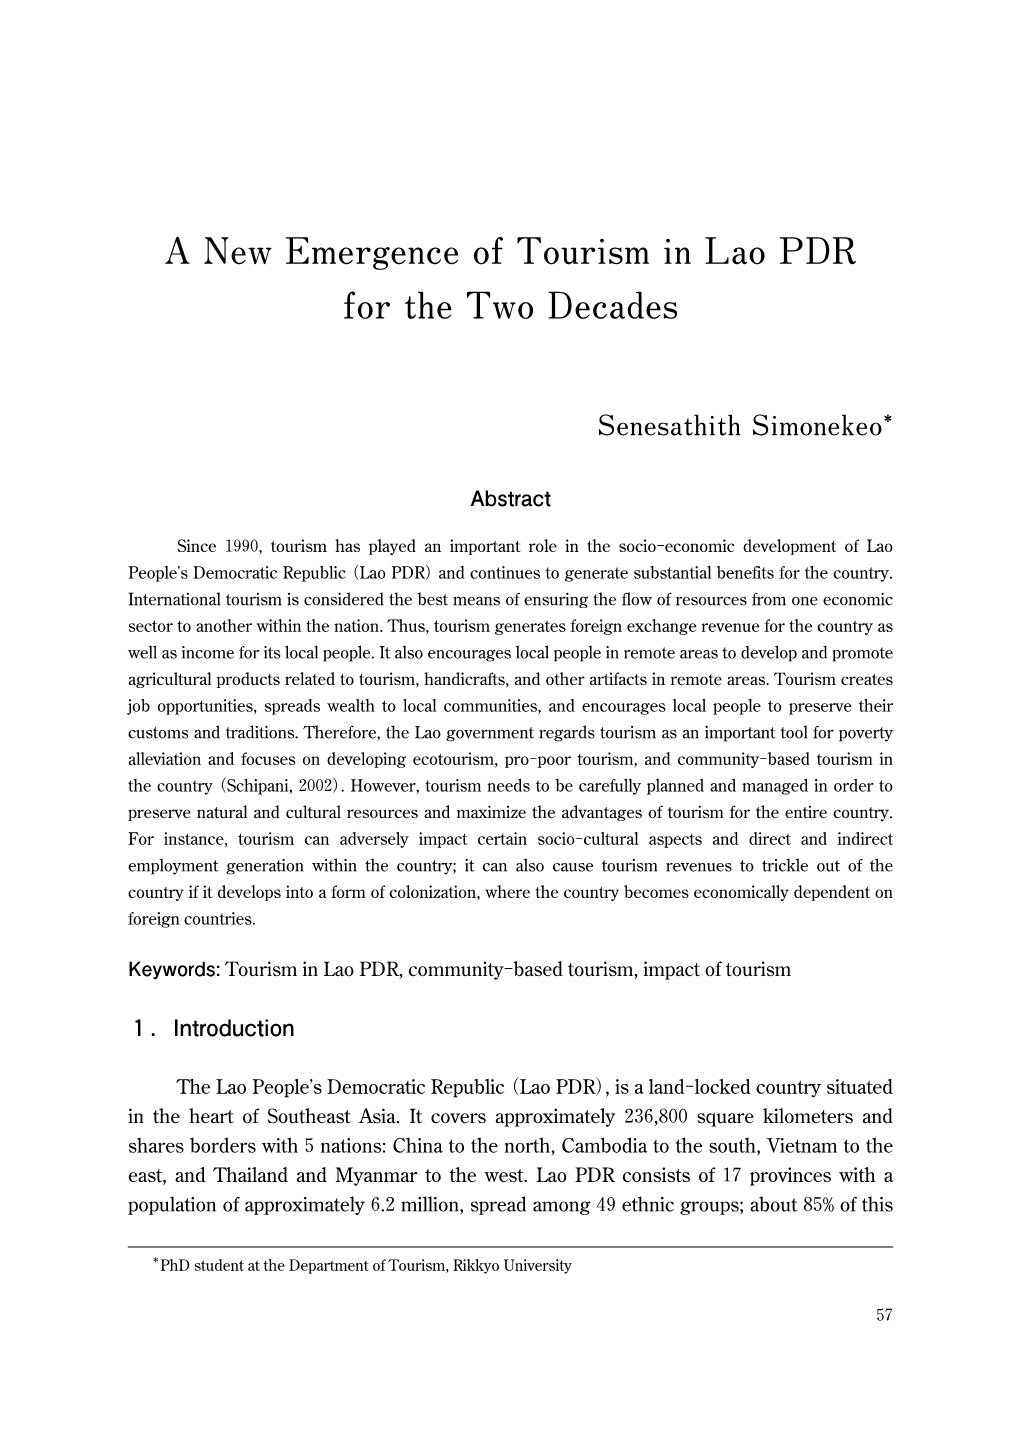 A New Emergence of Tourism in Lao PDR for the Two Decades